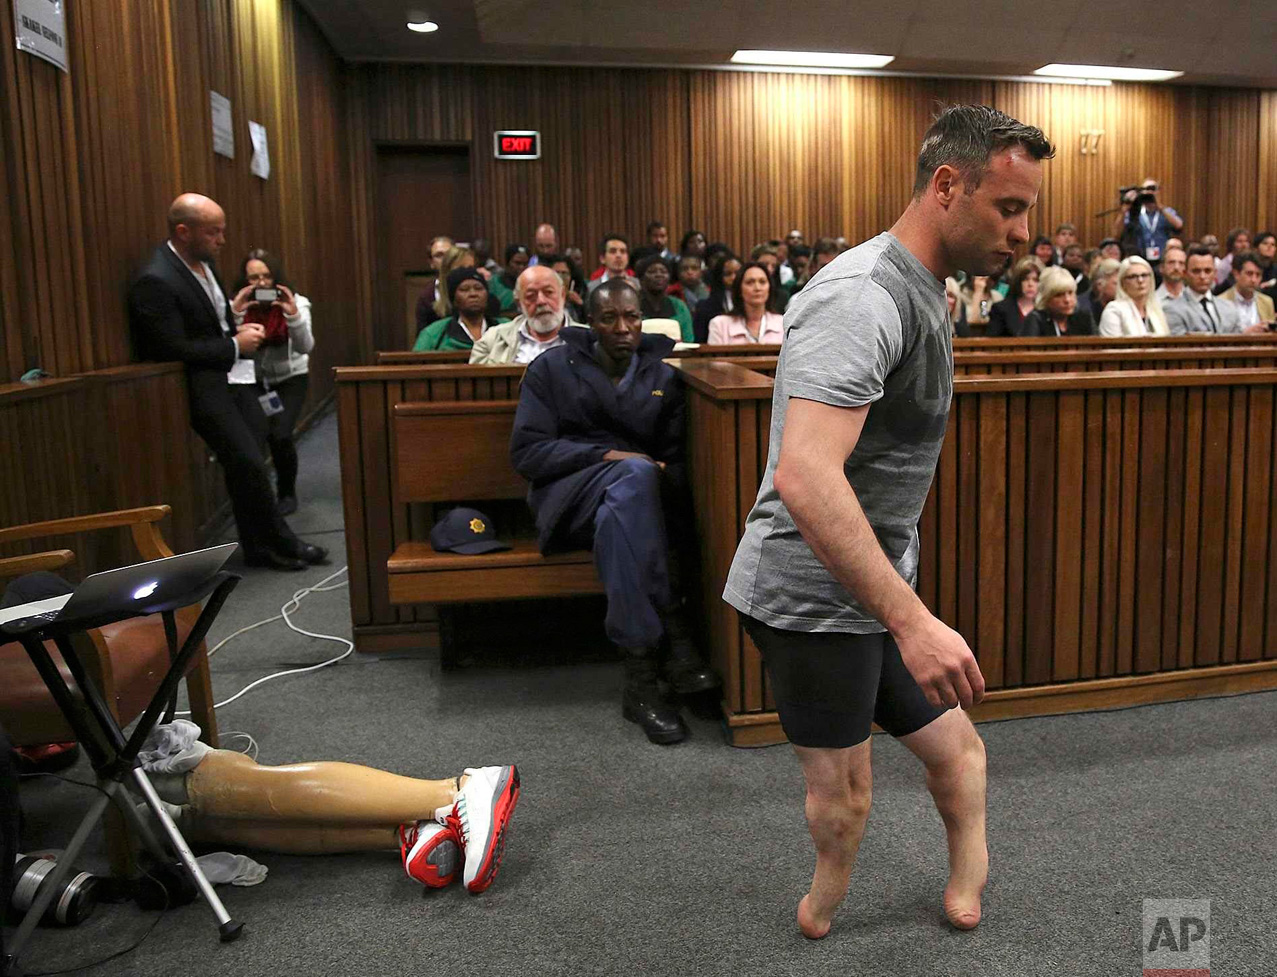  Oscar Pistorius' prosthetics lie on the floor as he walks on his amputated legs during argument in mitigation of sentence by his defense attorney Barry Roux in the High Court in Pretoria, South Africa, on June 15, 2016. An appeals court found Pistor